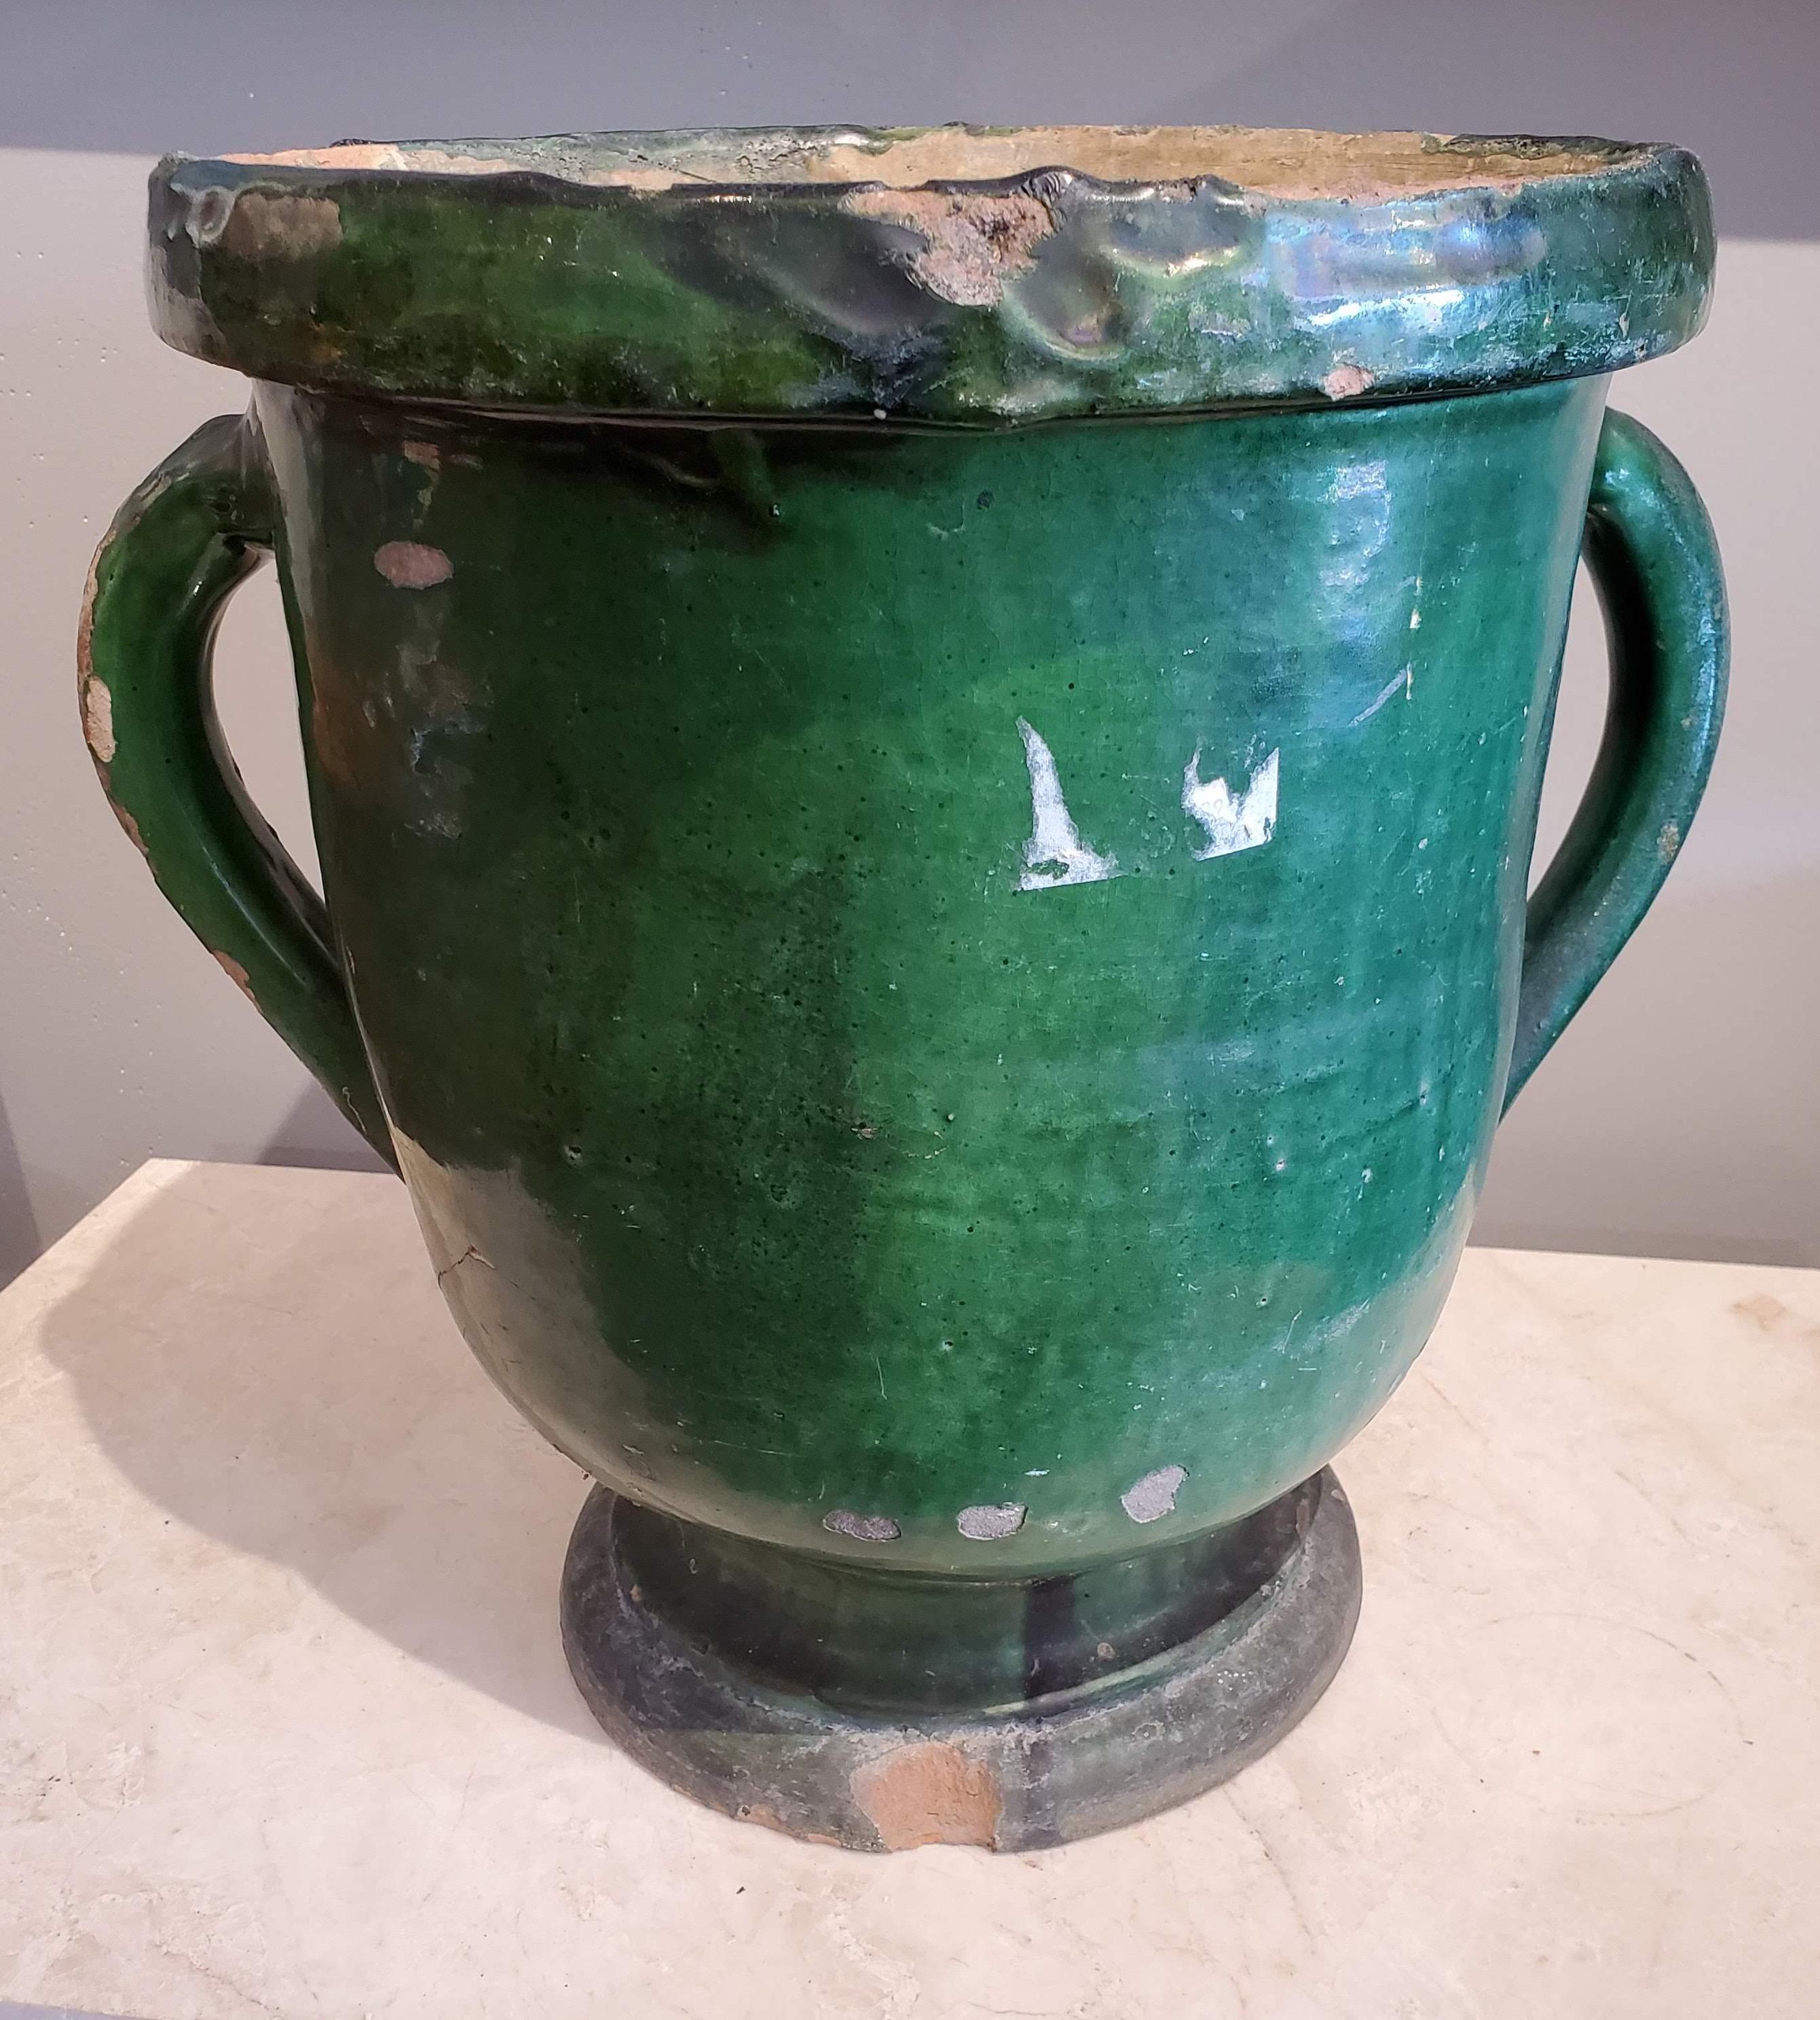 This large late 19th century green glazed terracotta flower pot with two handles is a beautiful example of French Provincial design. Lovely green color still maintained.
Provence, circa 1880.
Measures: 14